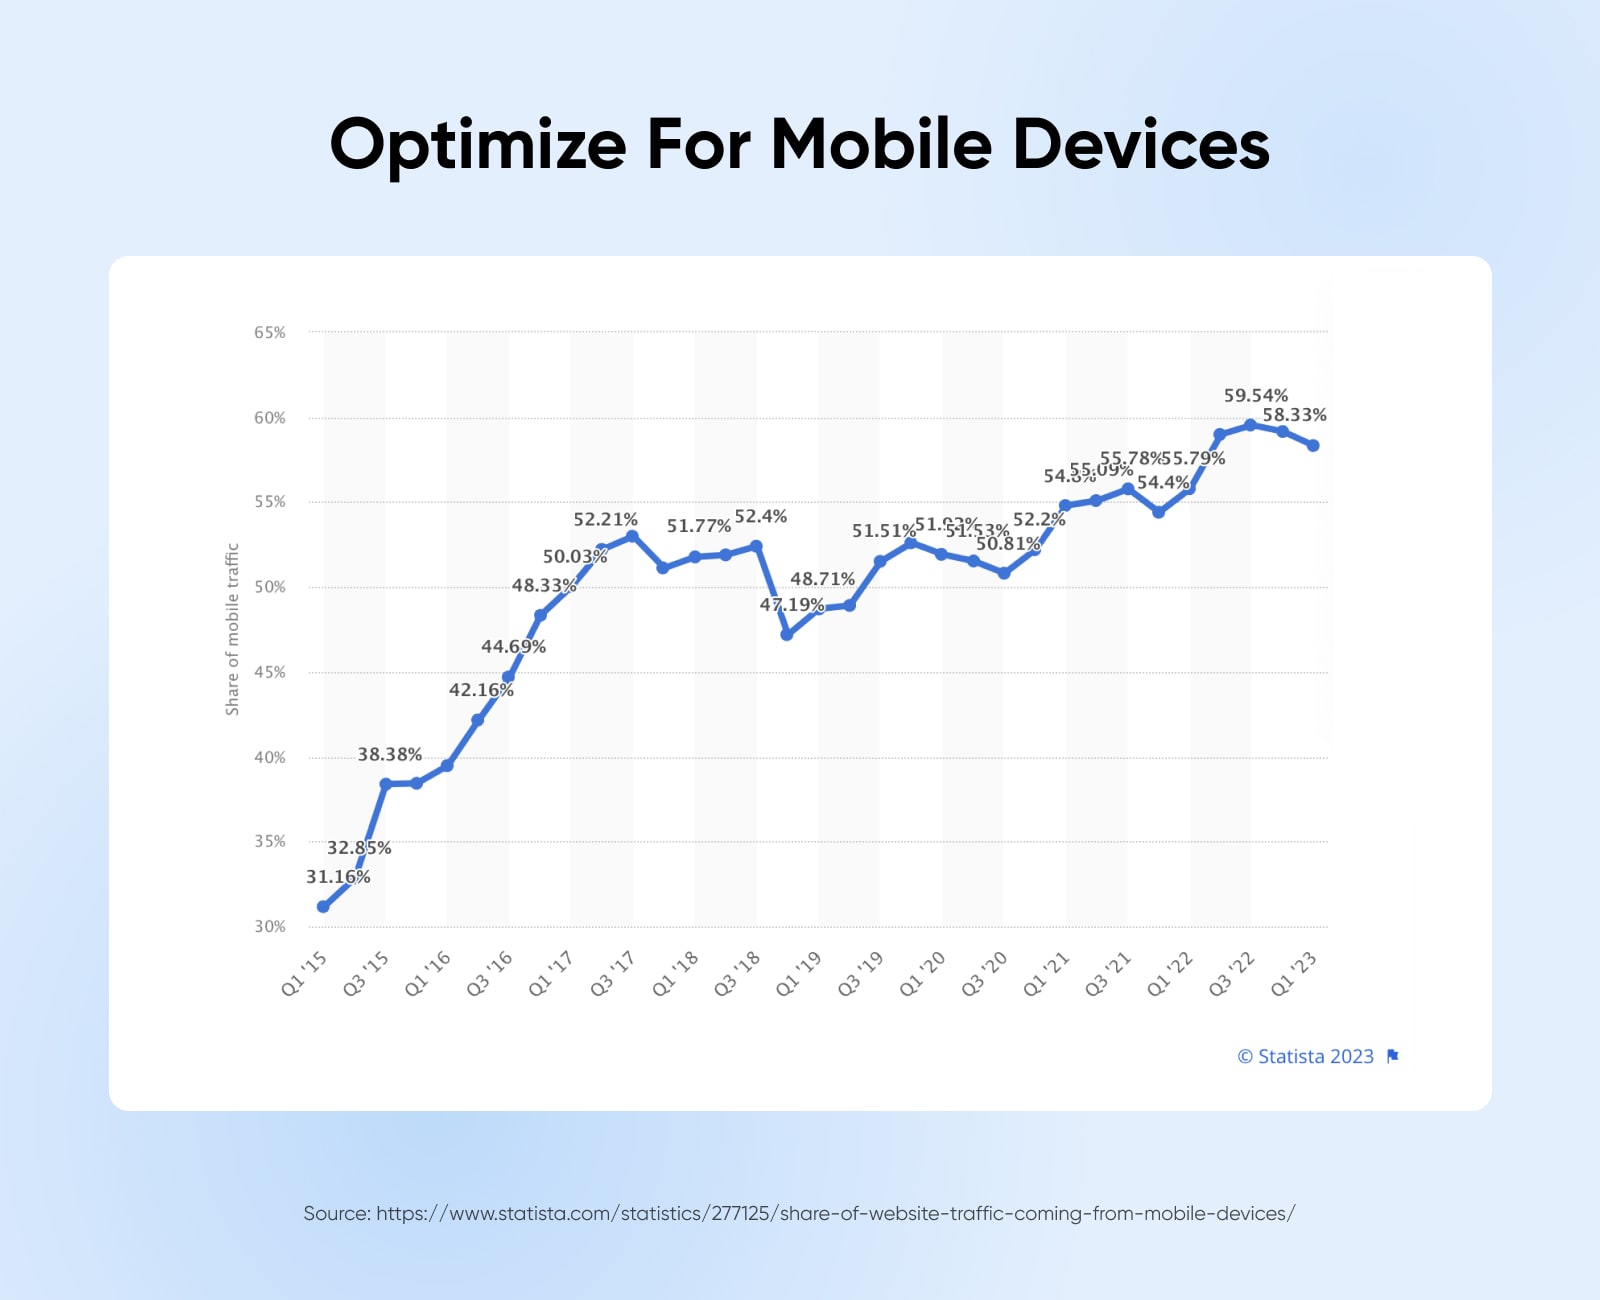 statista graph from 2023 showing optimization for mobile devices with a huge percentage growth around 2017, slight drop in 2019, and then steadily climbing through Q1 of 2023